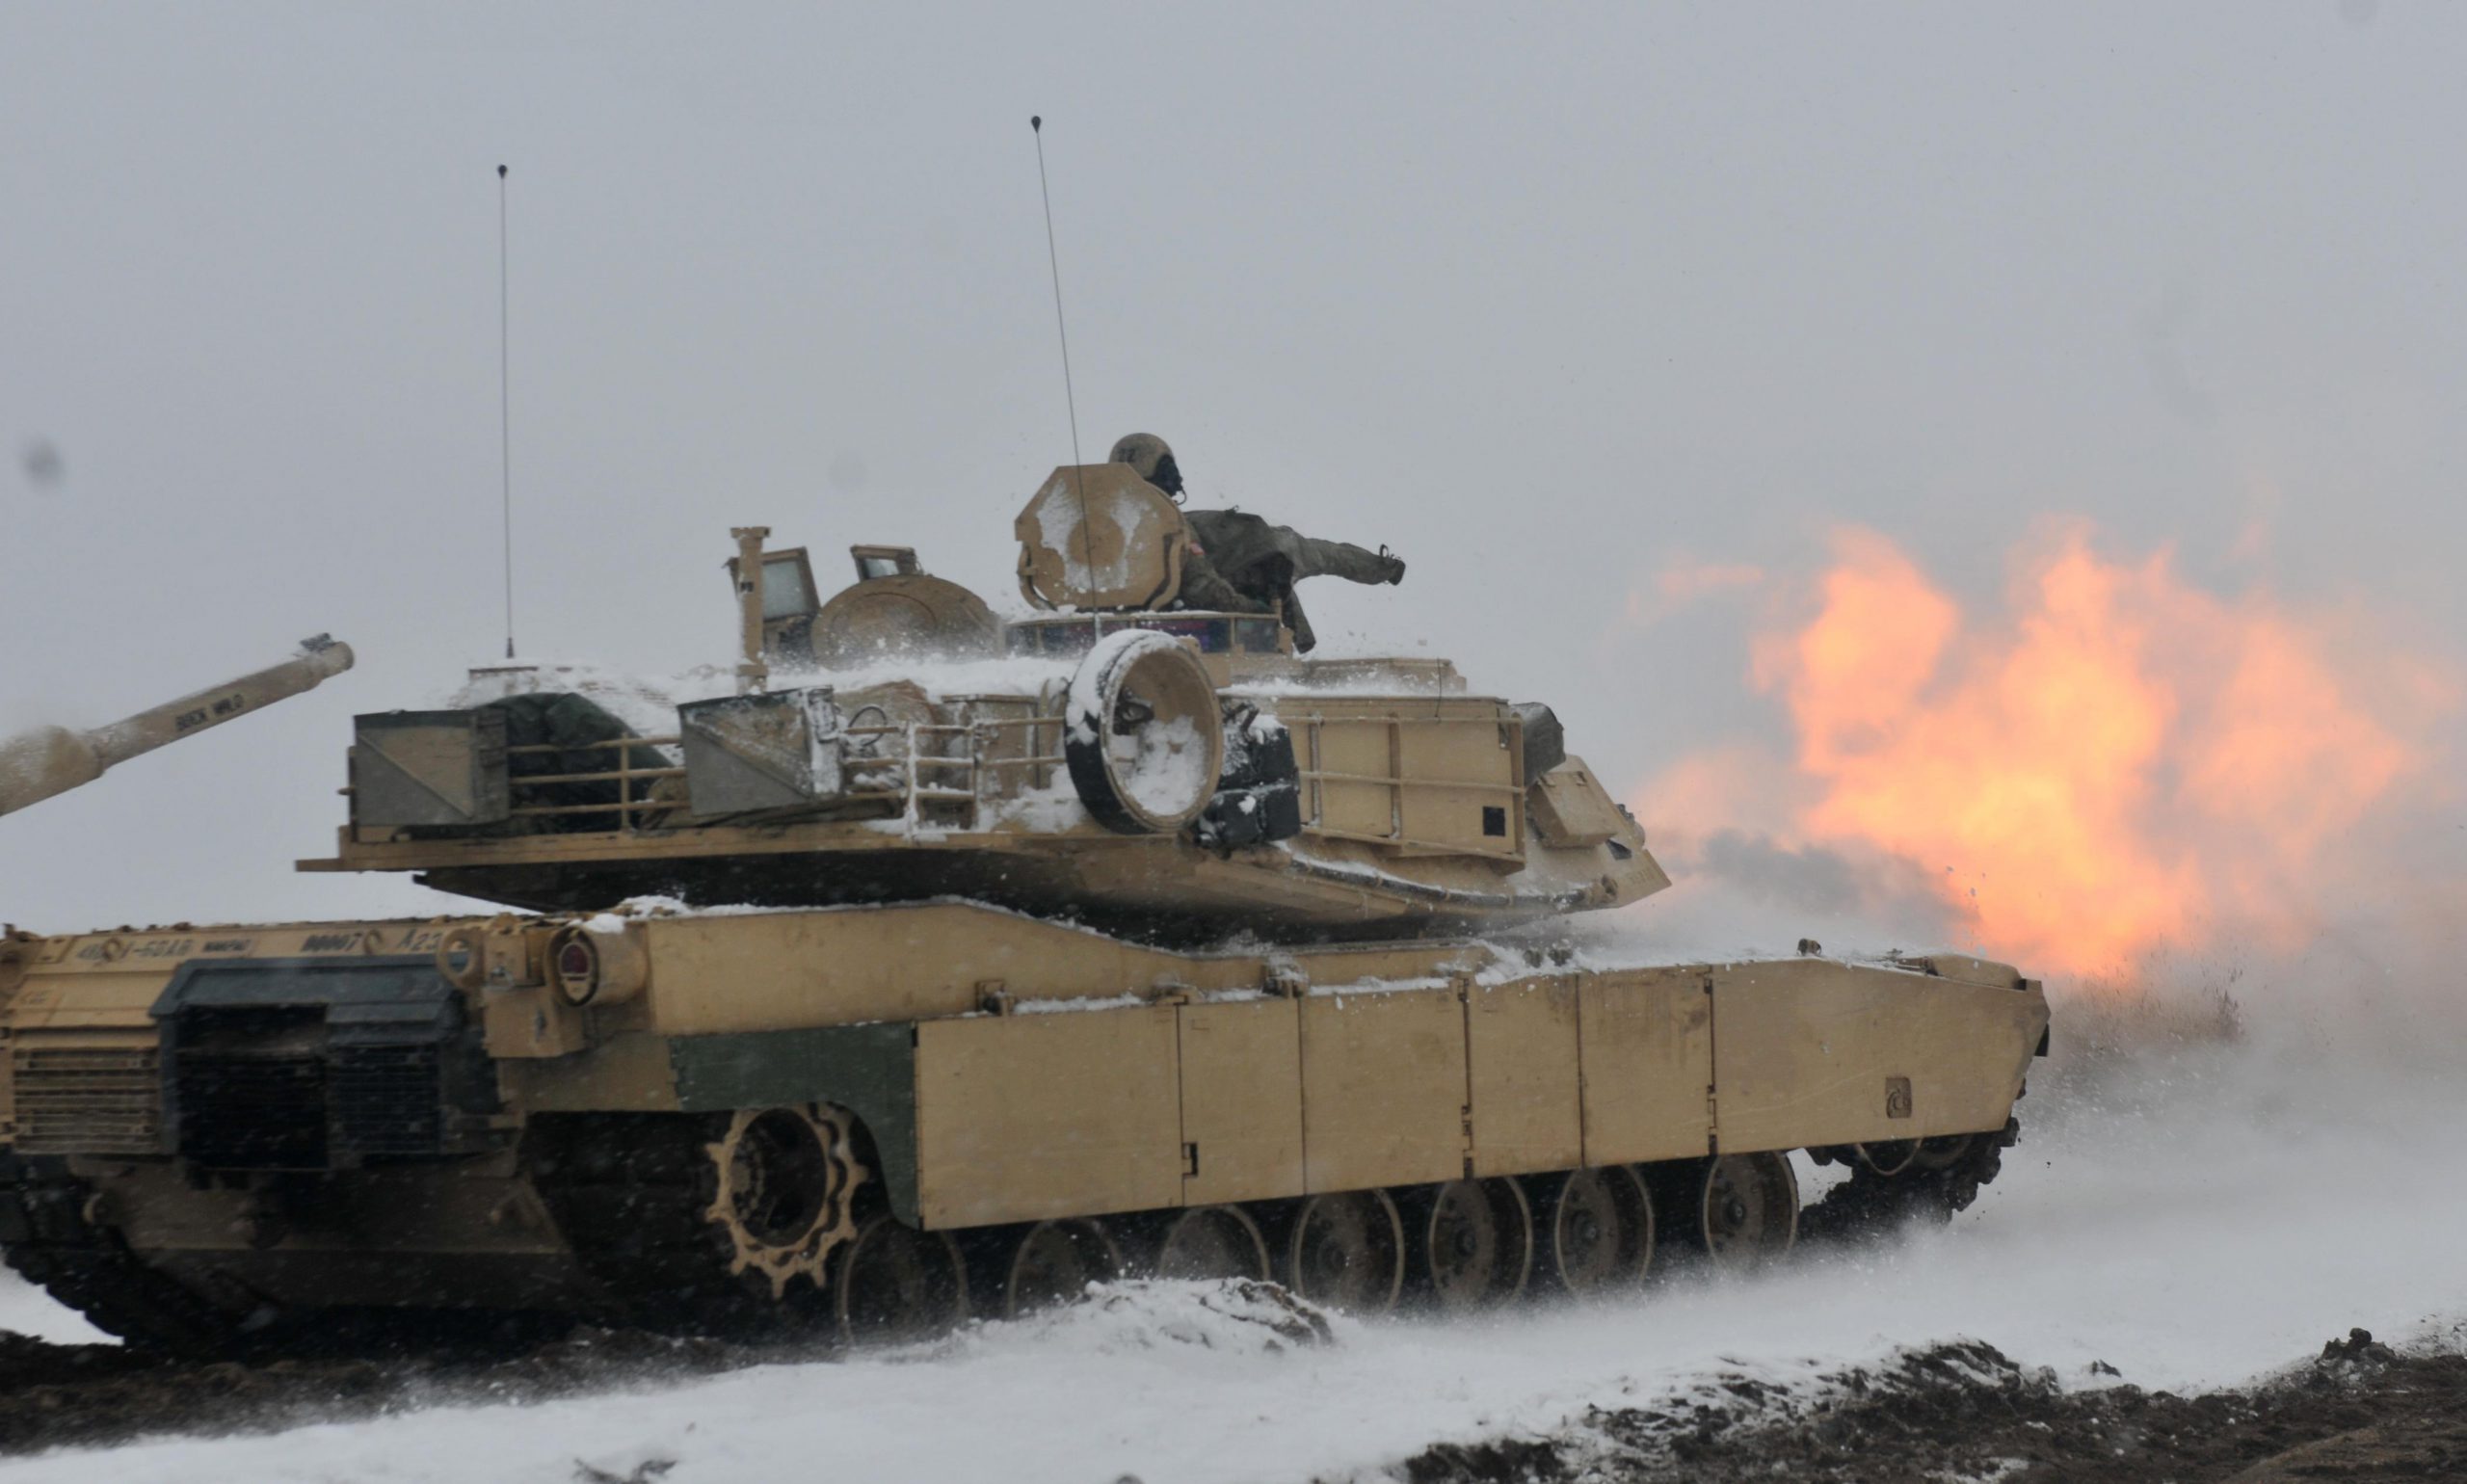 A round is fired from a U.S. Army M1A2 tank belonging to 1st Battalion, 68th Armor Regiment, 3rd Armored Brigade Combat Team, 4th Infantry Division, during the first live fire accuracy screening tests at Presidential Range in Swietozow, Poland, Jan. 16, 2017. Army photo by Staff Sgt. Elizabeth Tarr. -